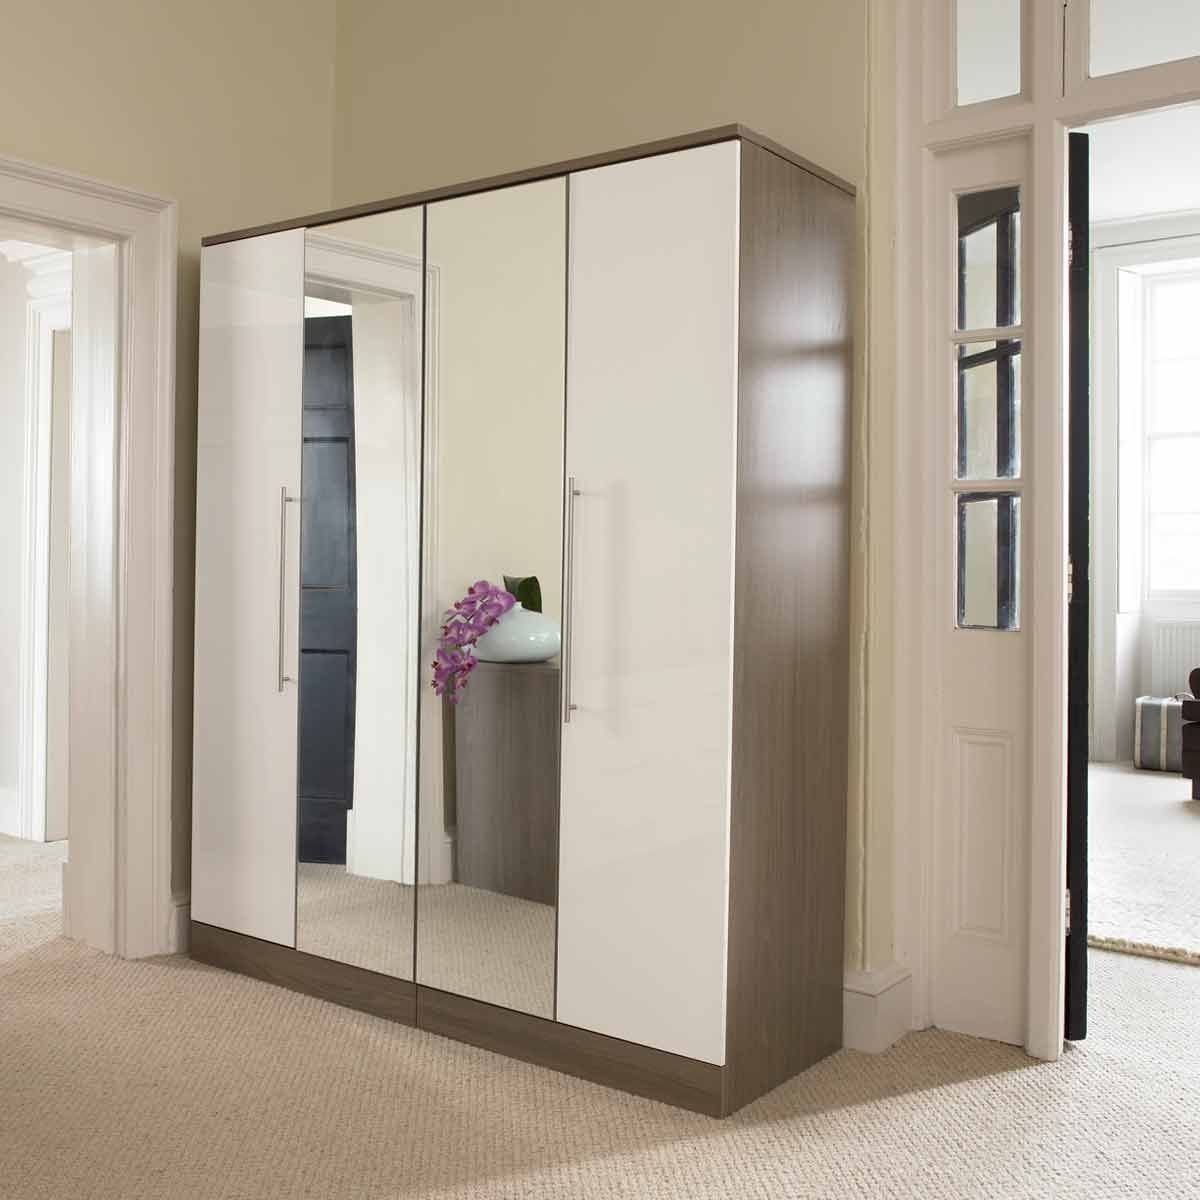 Trendy Mirror Design Ideas: Sliding Hinged Wardrobe With Mirror Doors For Double Mirrored Wardrobes (View 12 of 15)